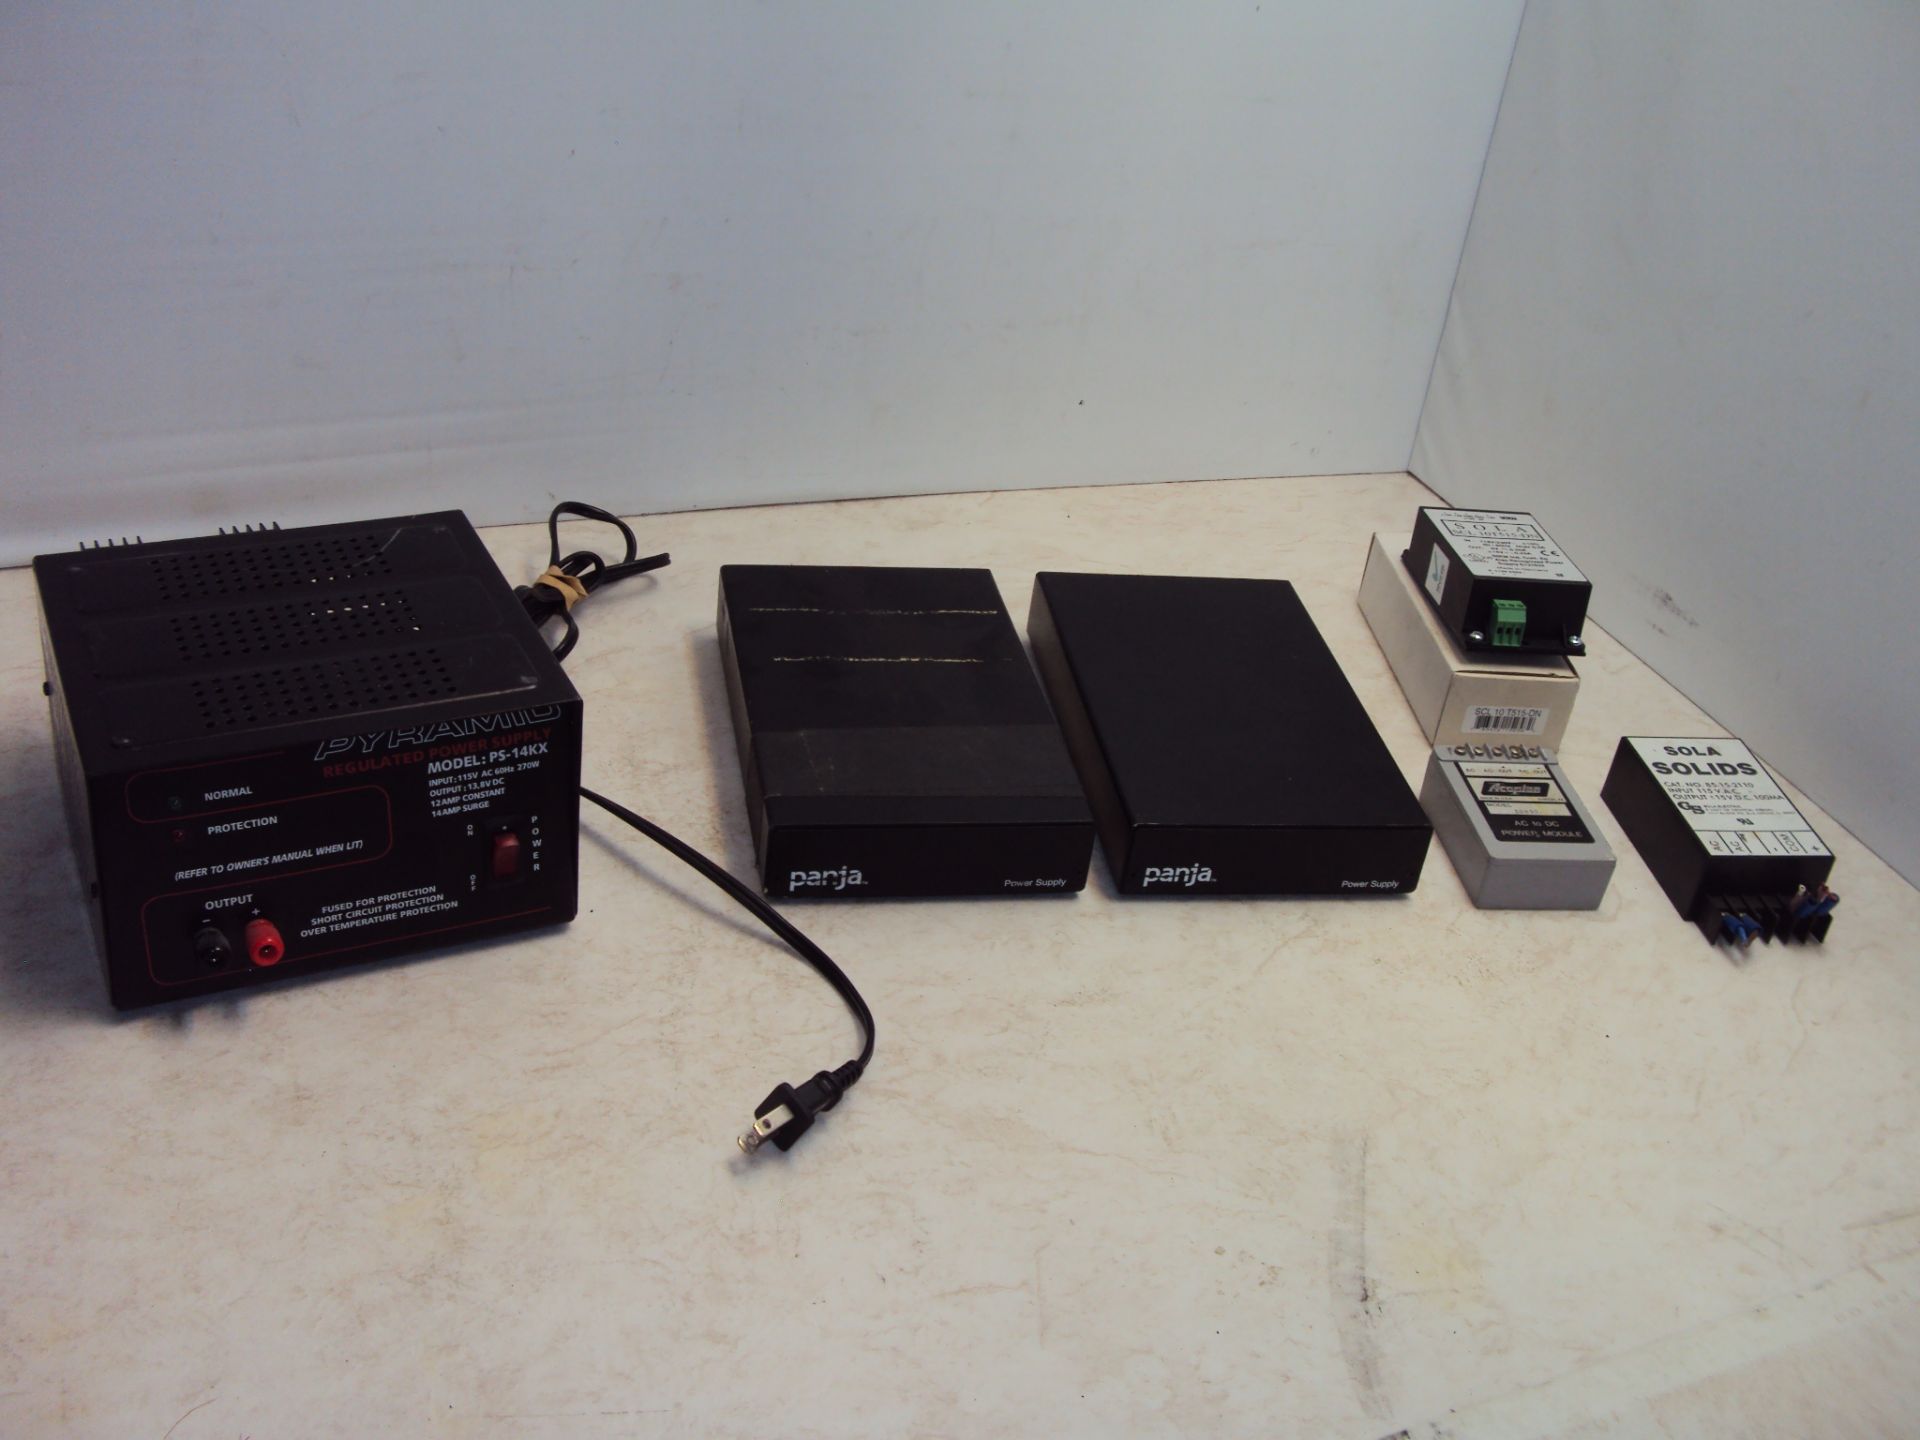 Power Supplies - Pyramid PS14KX (2) Panja & (3) Solid State